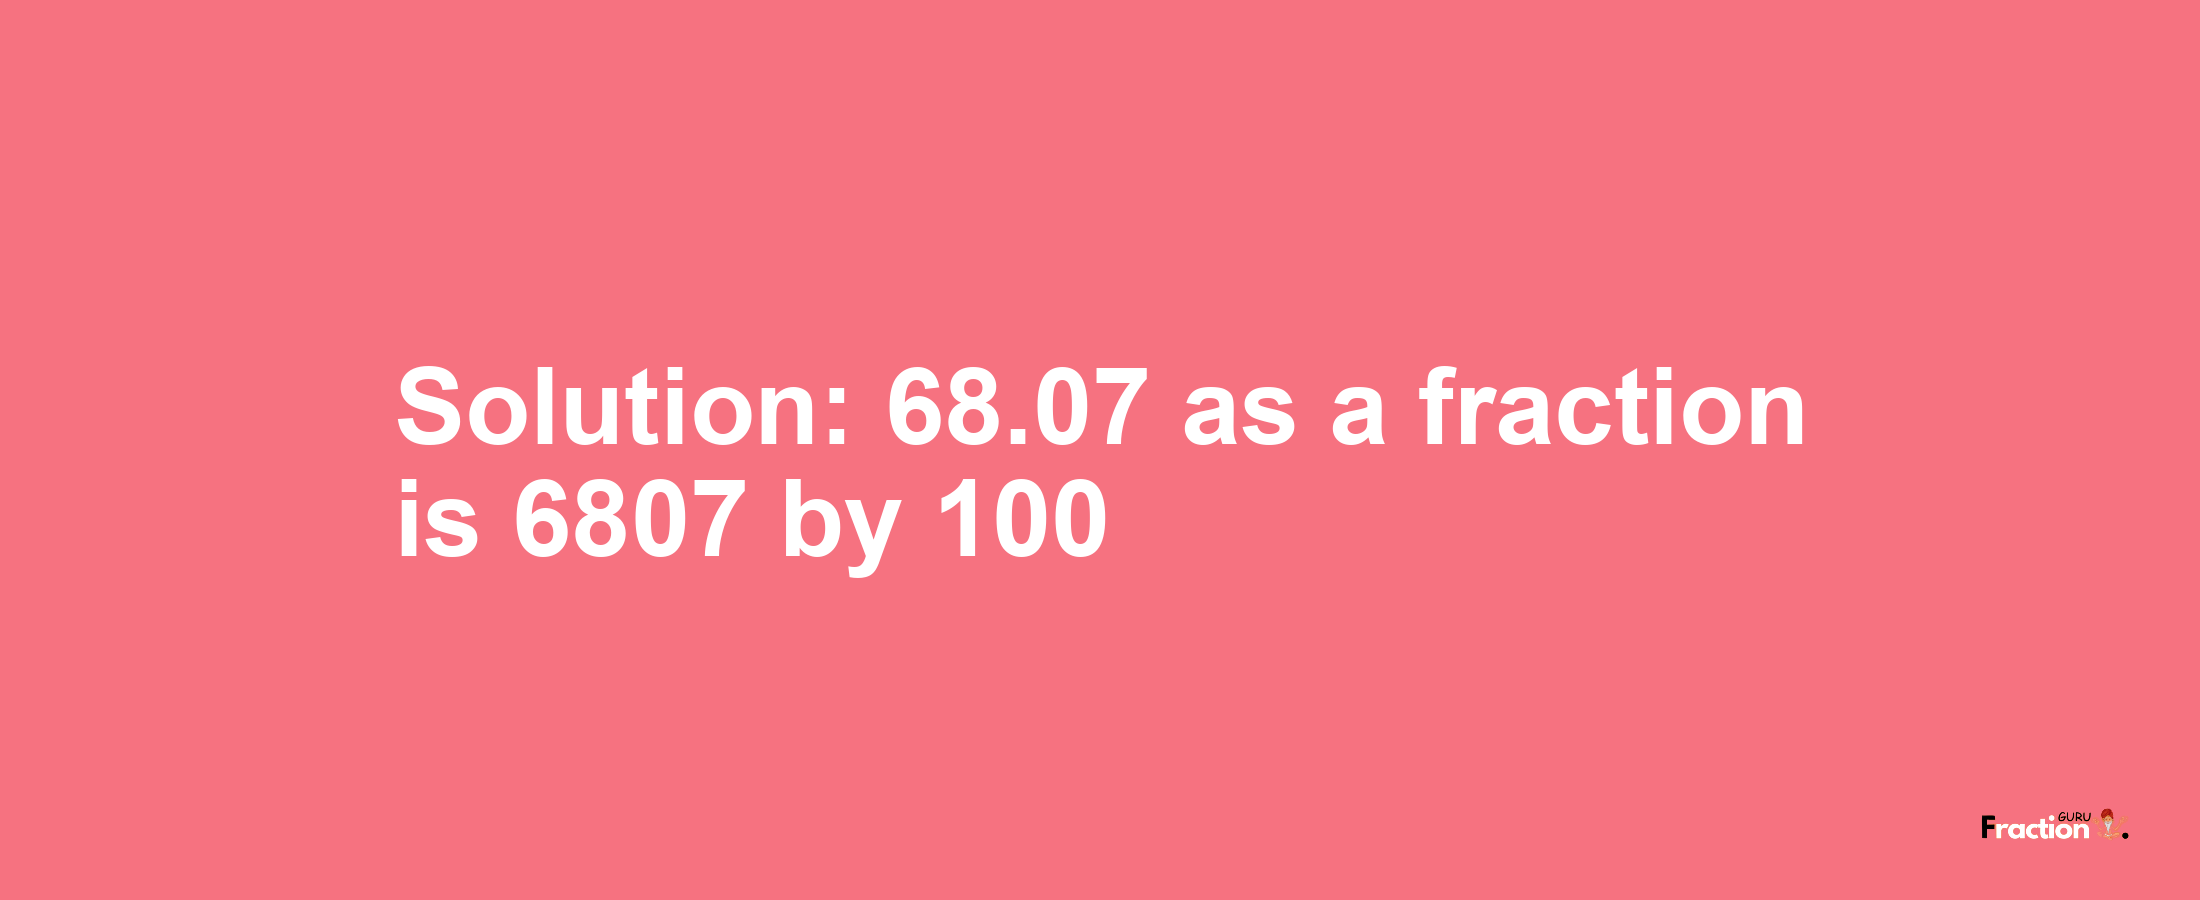 Solution:68.07 as a fraction is 6807/100